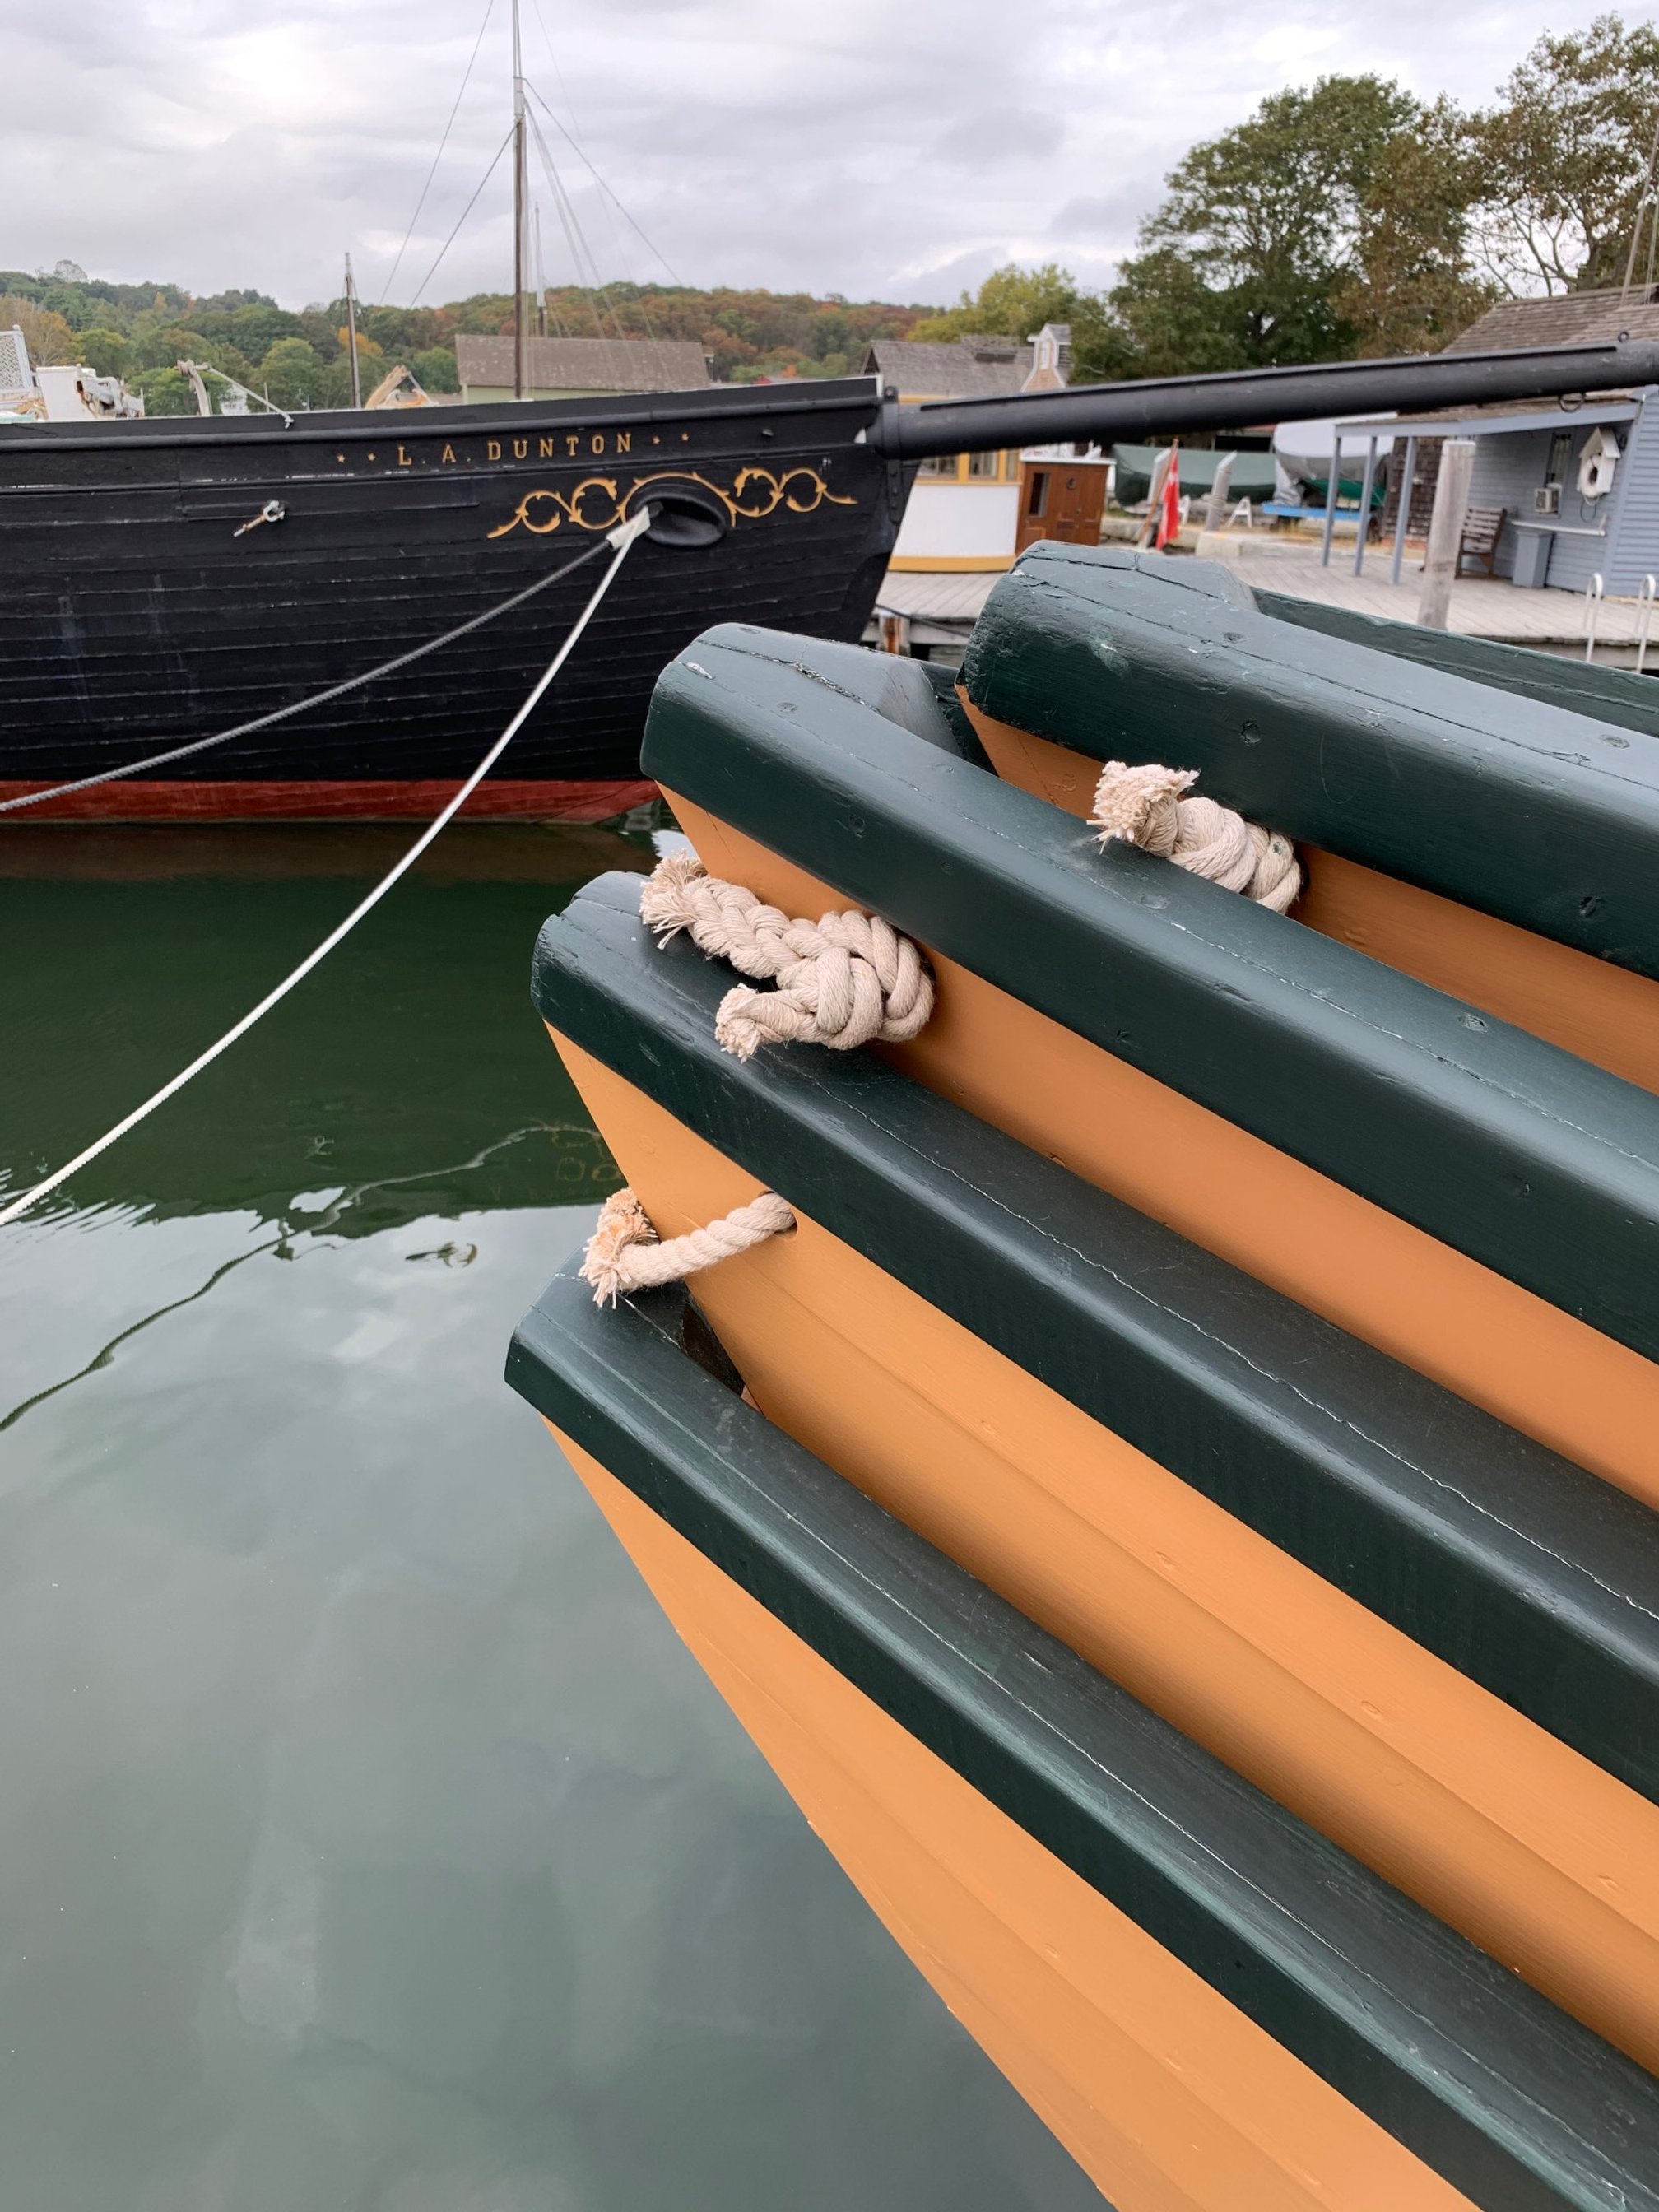 Dories await visitors for "Story Boats"